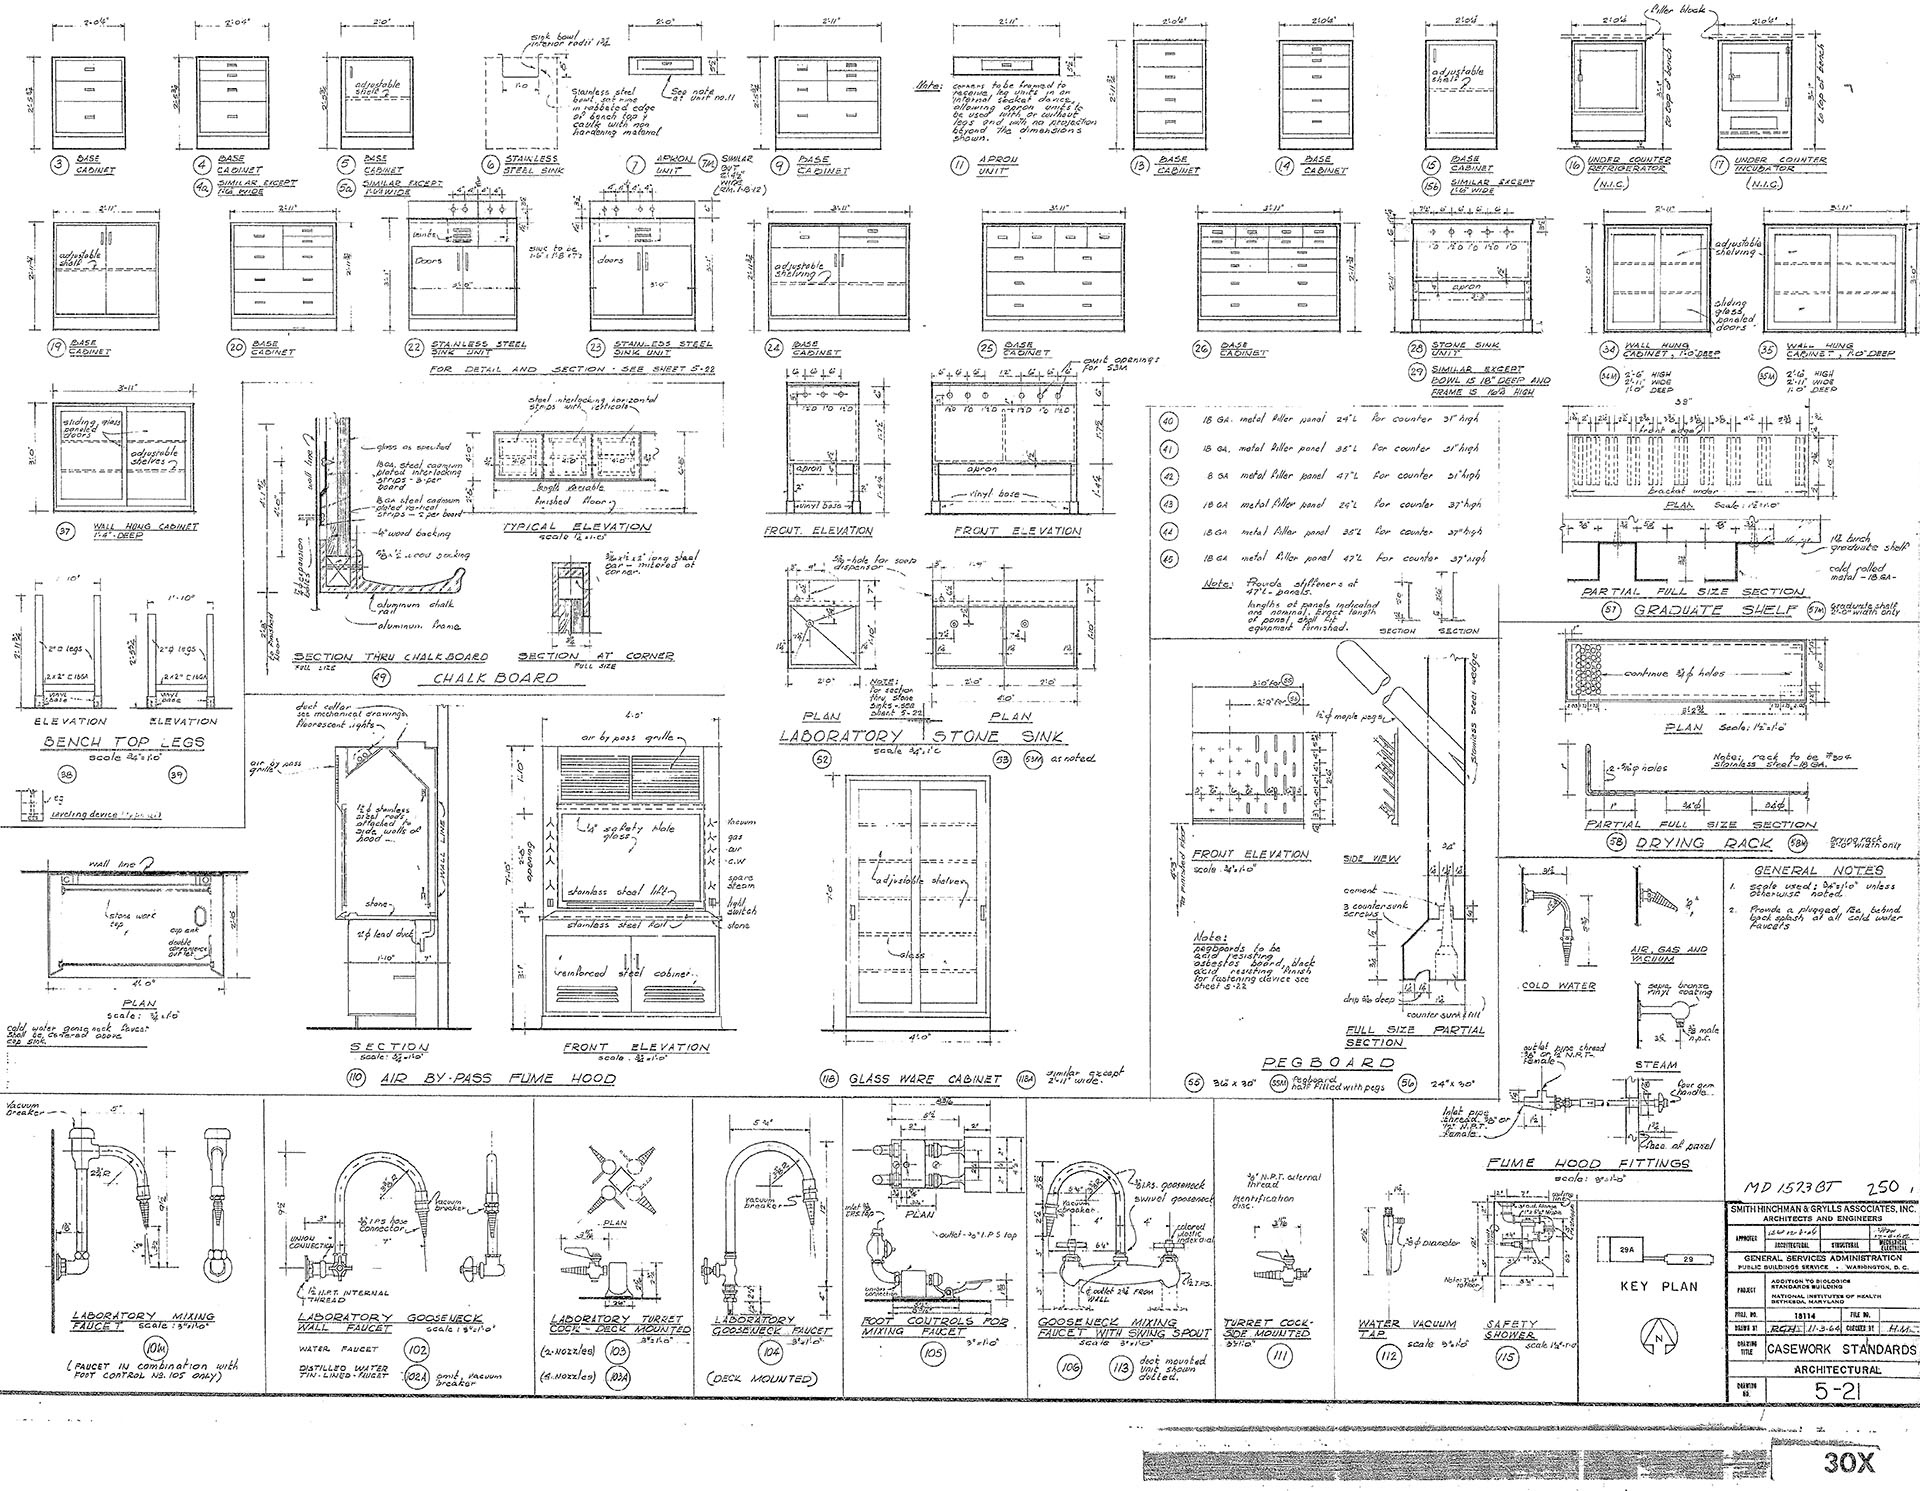 Details drawing showing the standard caseworks (cabinets, sinks, chalkboards, benchtops, faucets, etc.) in Building 29A.